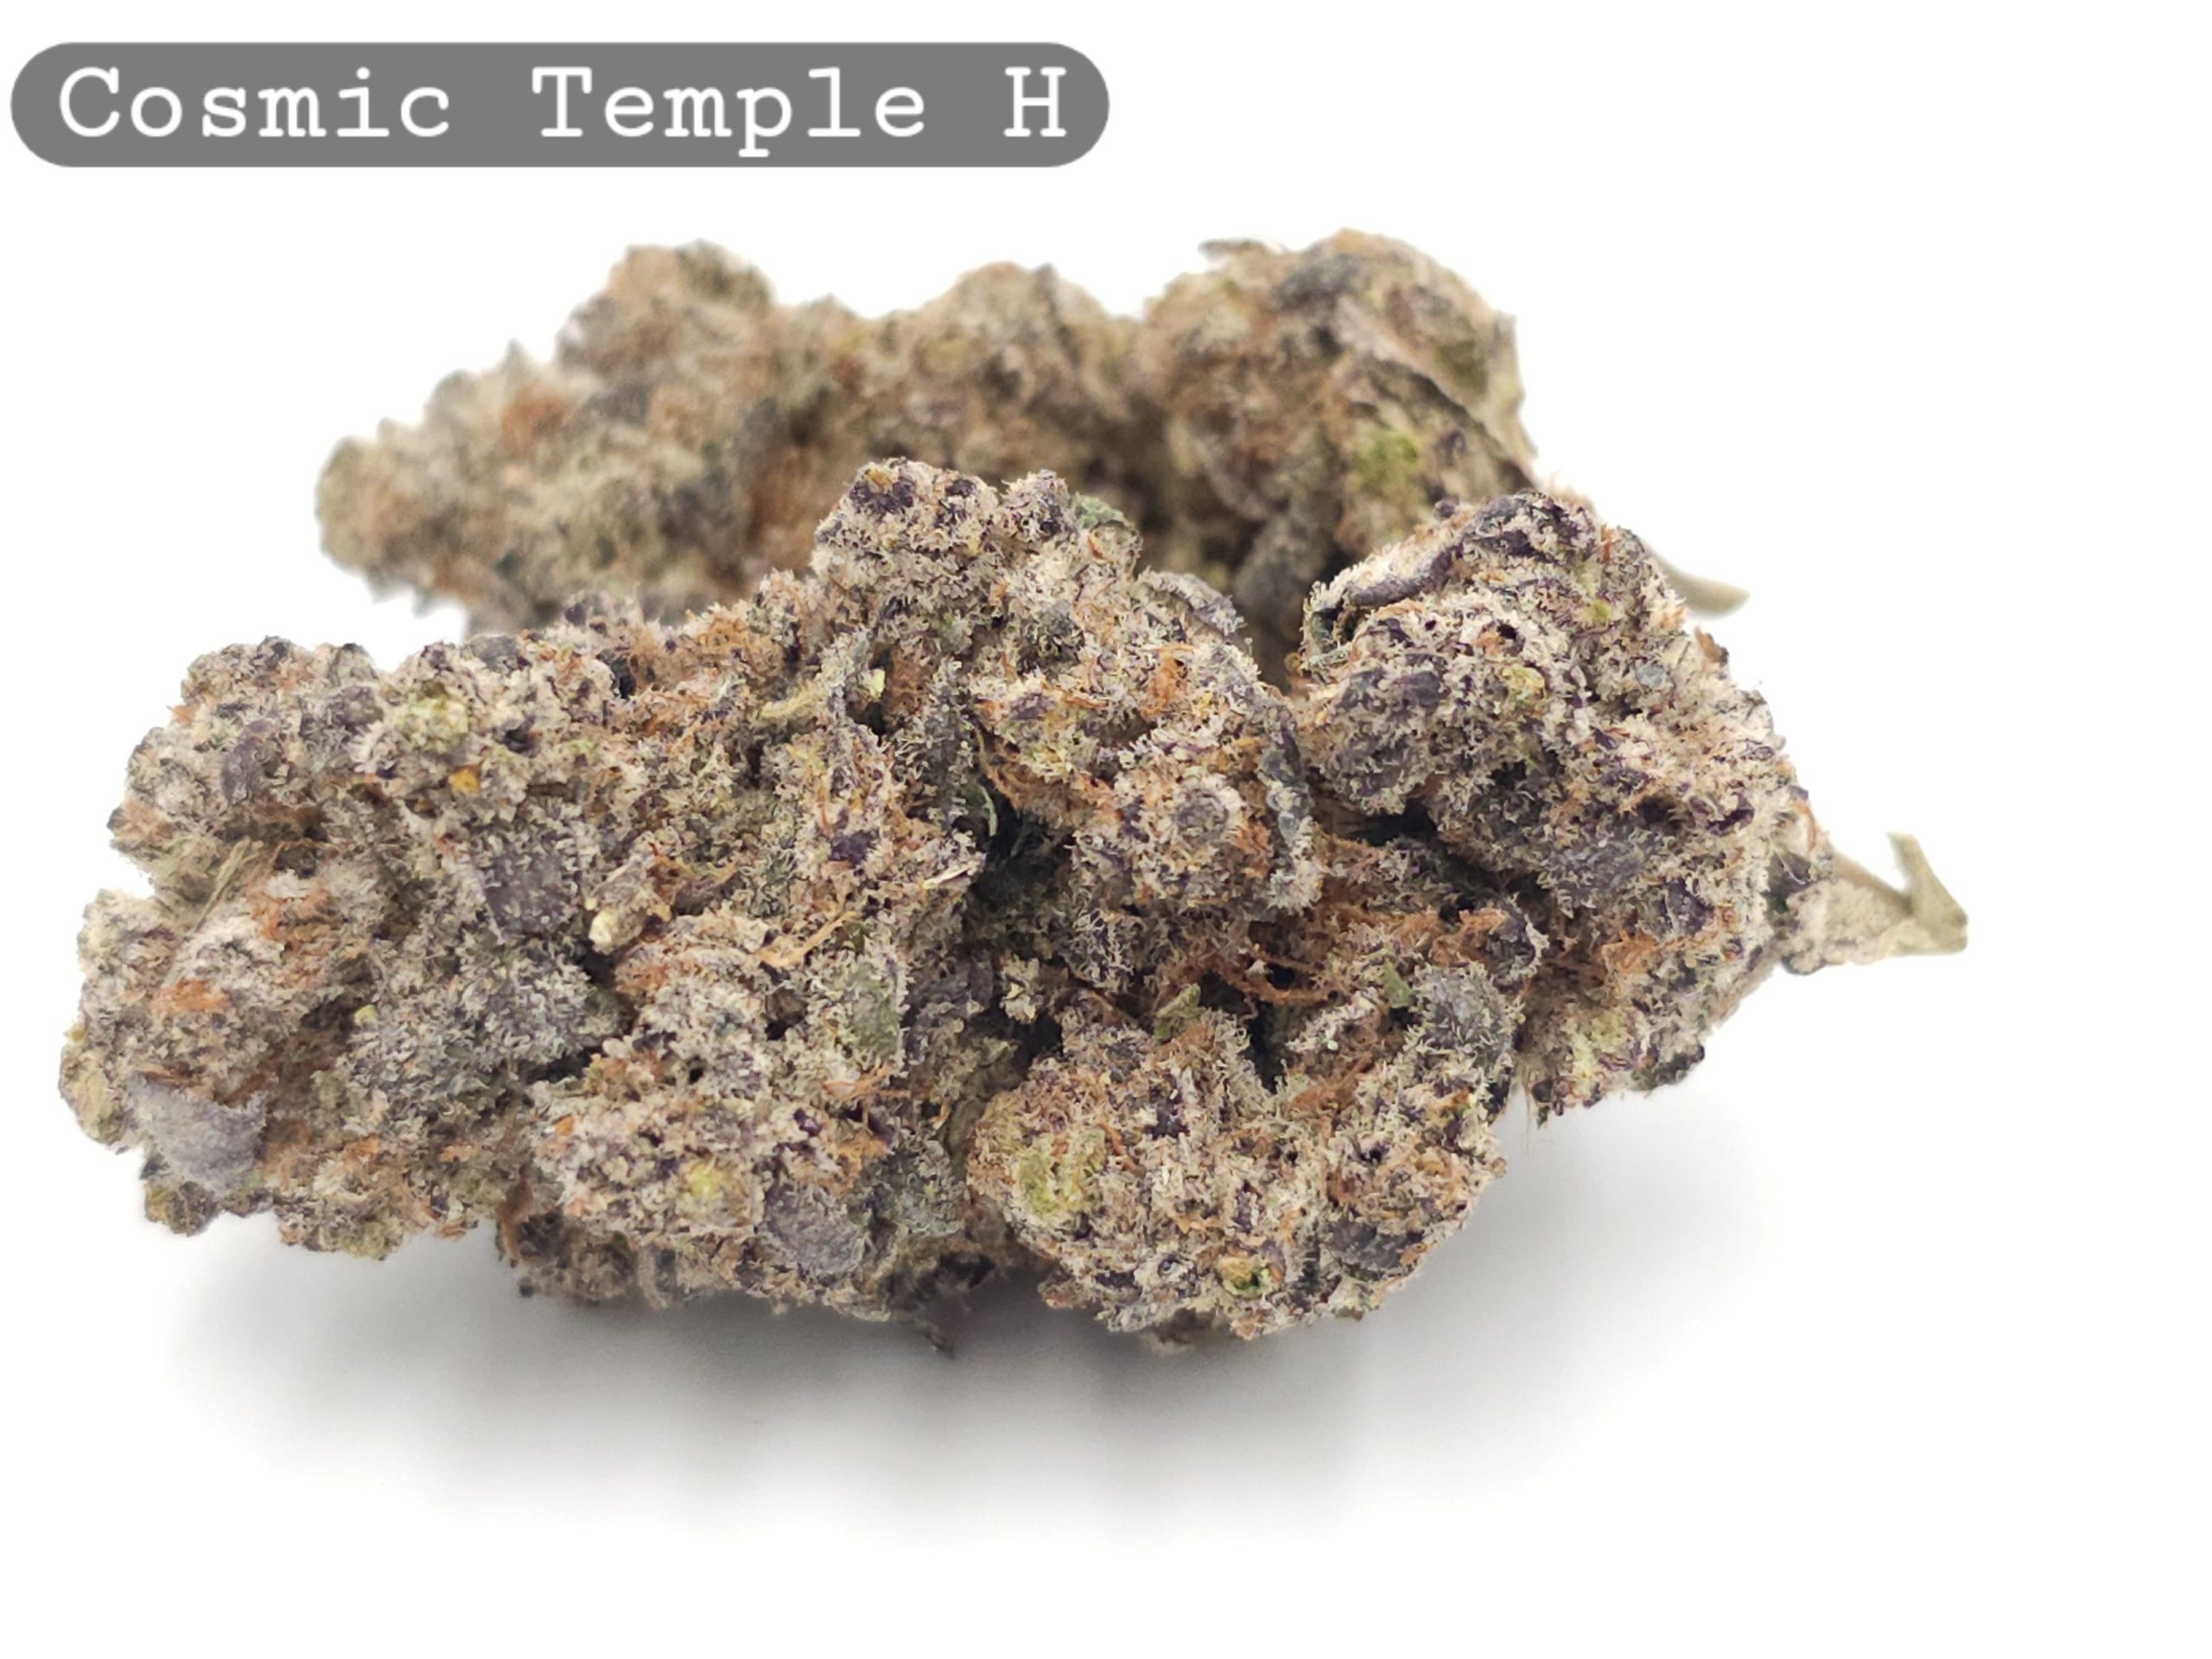 Indoor Cosmic Temple_Cannabis Bud_Hydro Cannabis_The dope warehouse